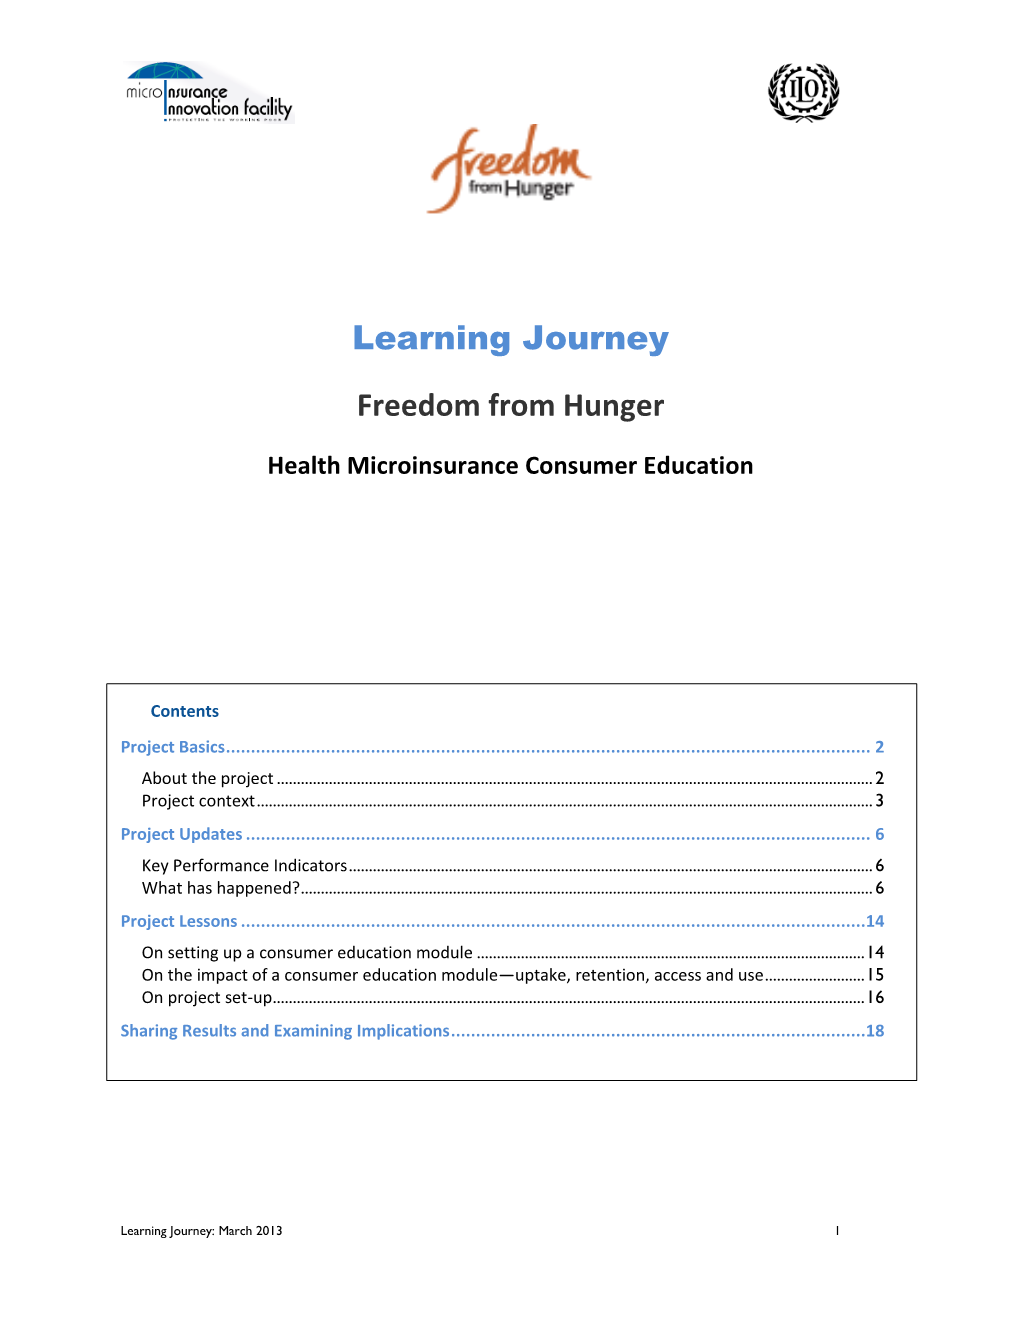 Freedom from Hunger Learning Journey